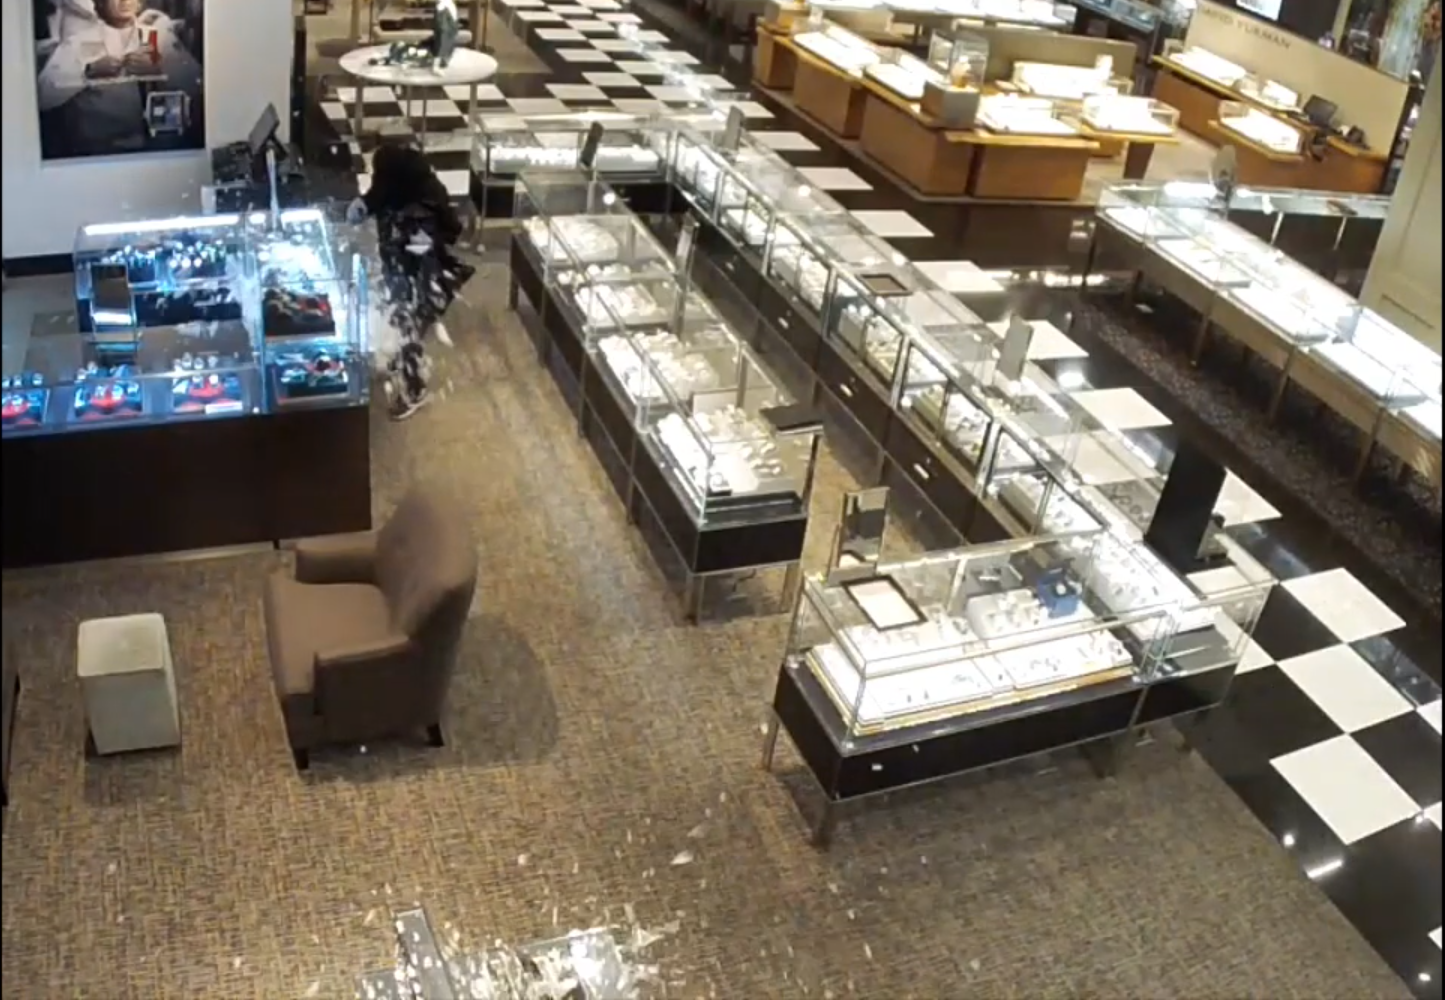 Video: Burglars smash through Palo Alto Bloomingdale's, stealing $83K in  jewelry and watches